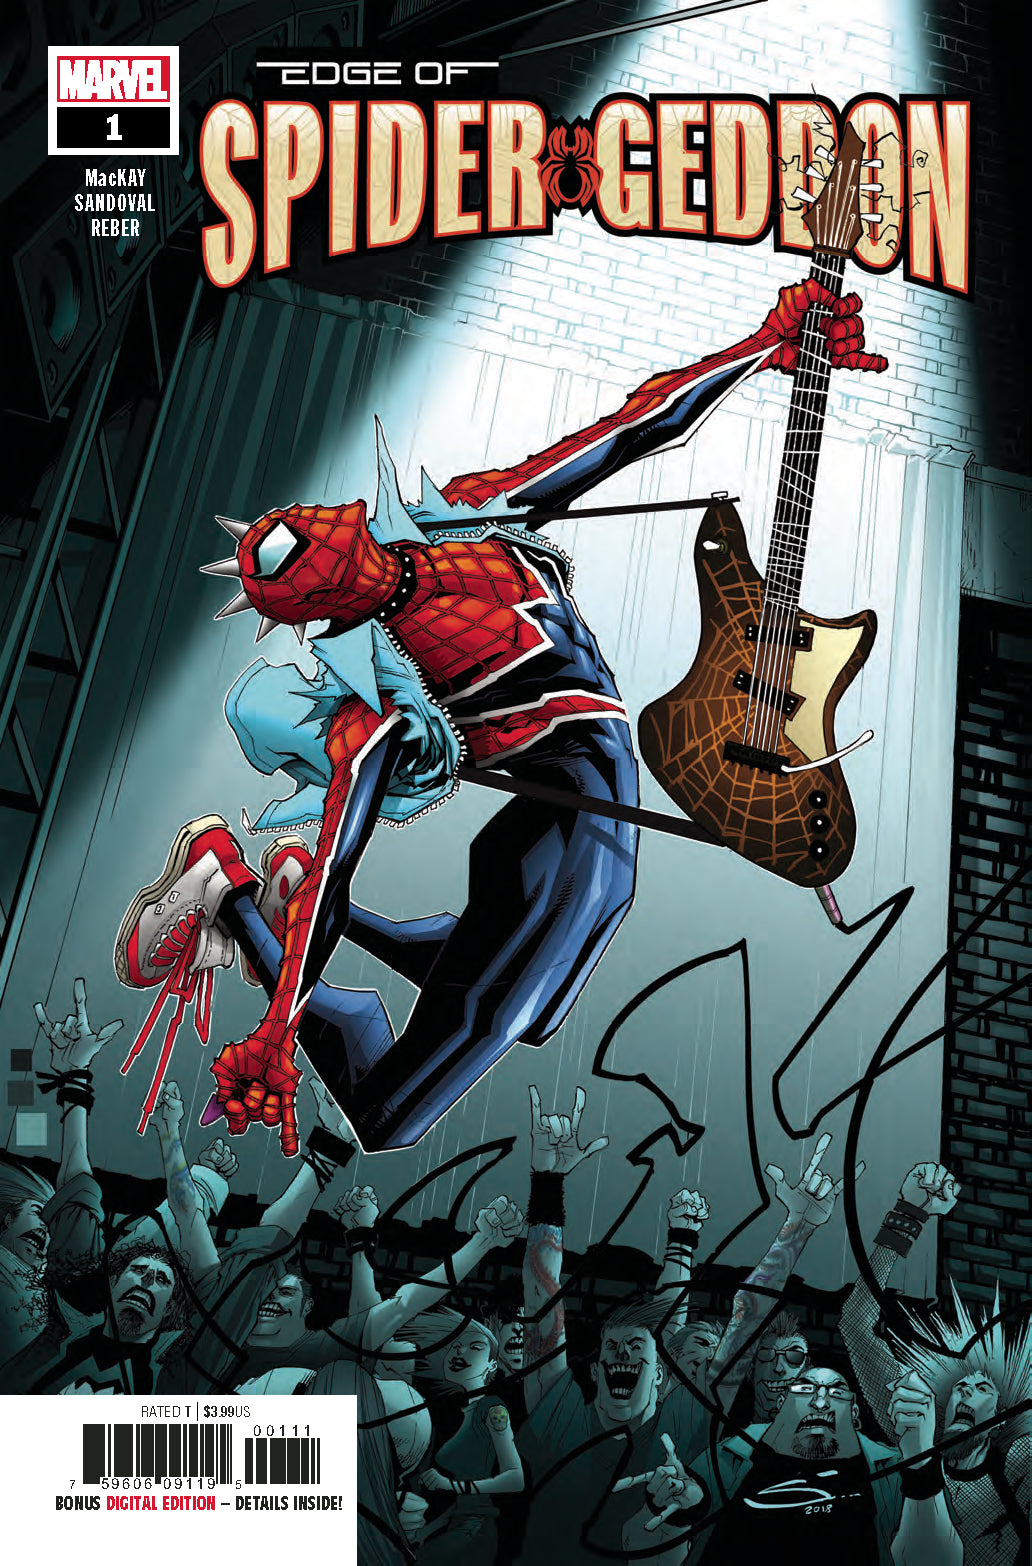 EDGE OF SPIDER-GEDDON #1 (OF 4) COVER